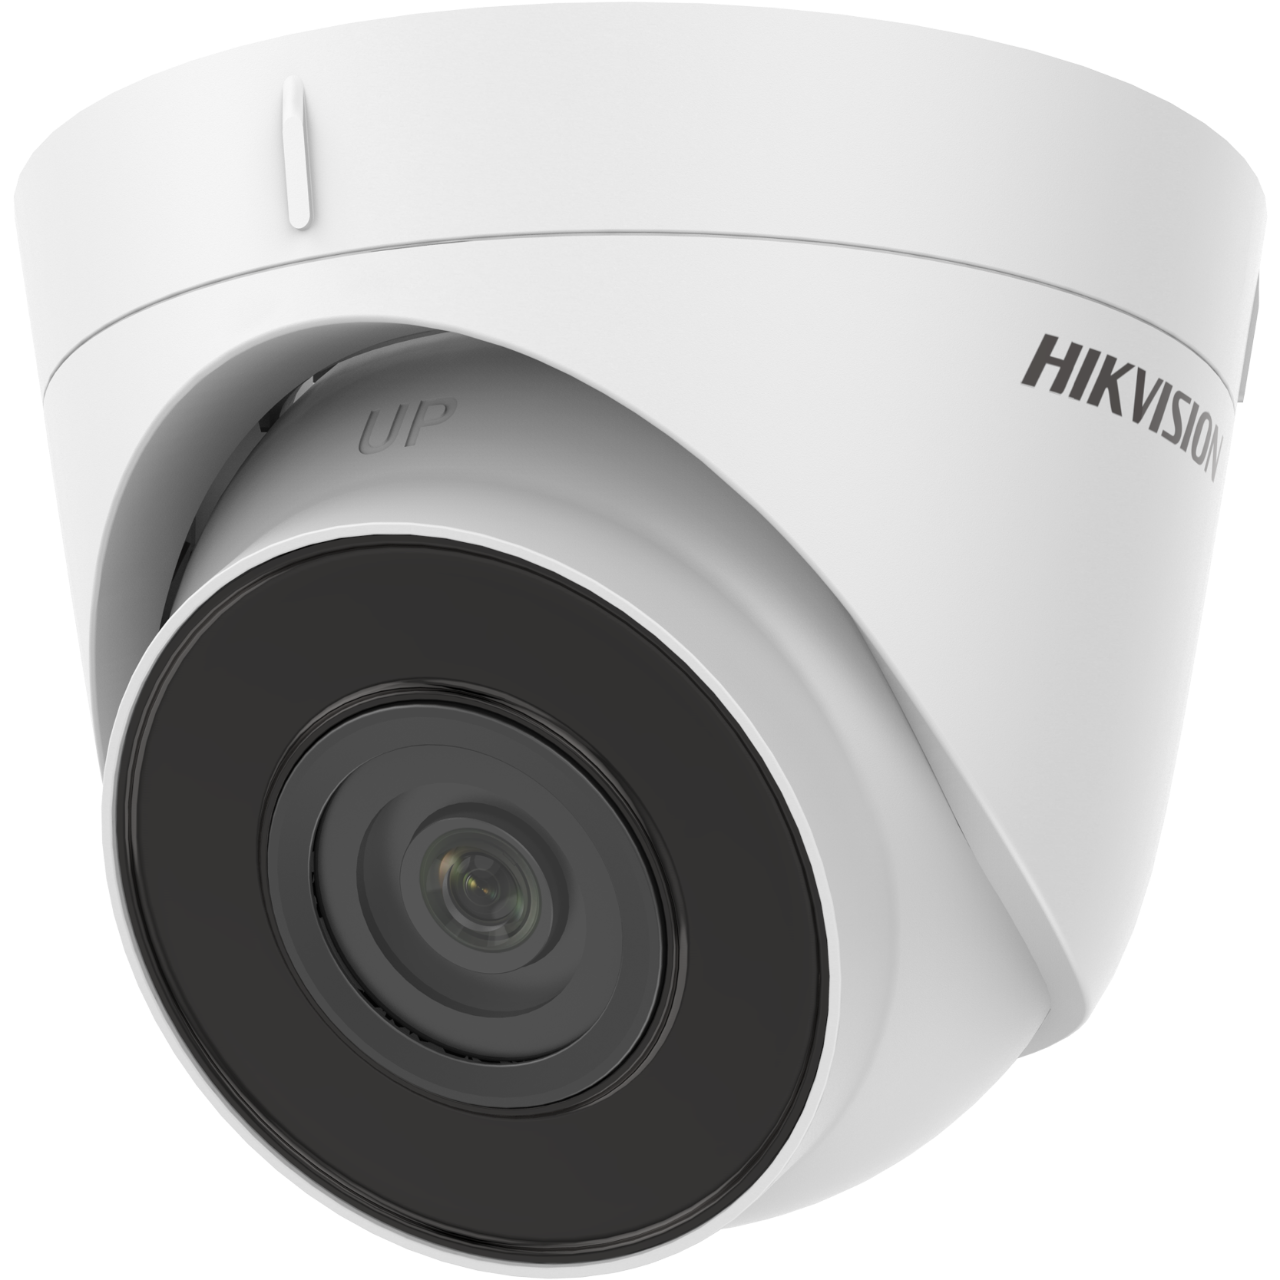 Hikvision 2MP 30m IR Turret Outdoor Network Camera - DS-2CD1323G0E-I